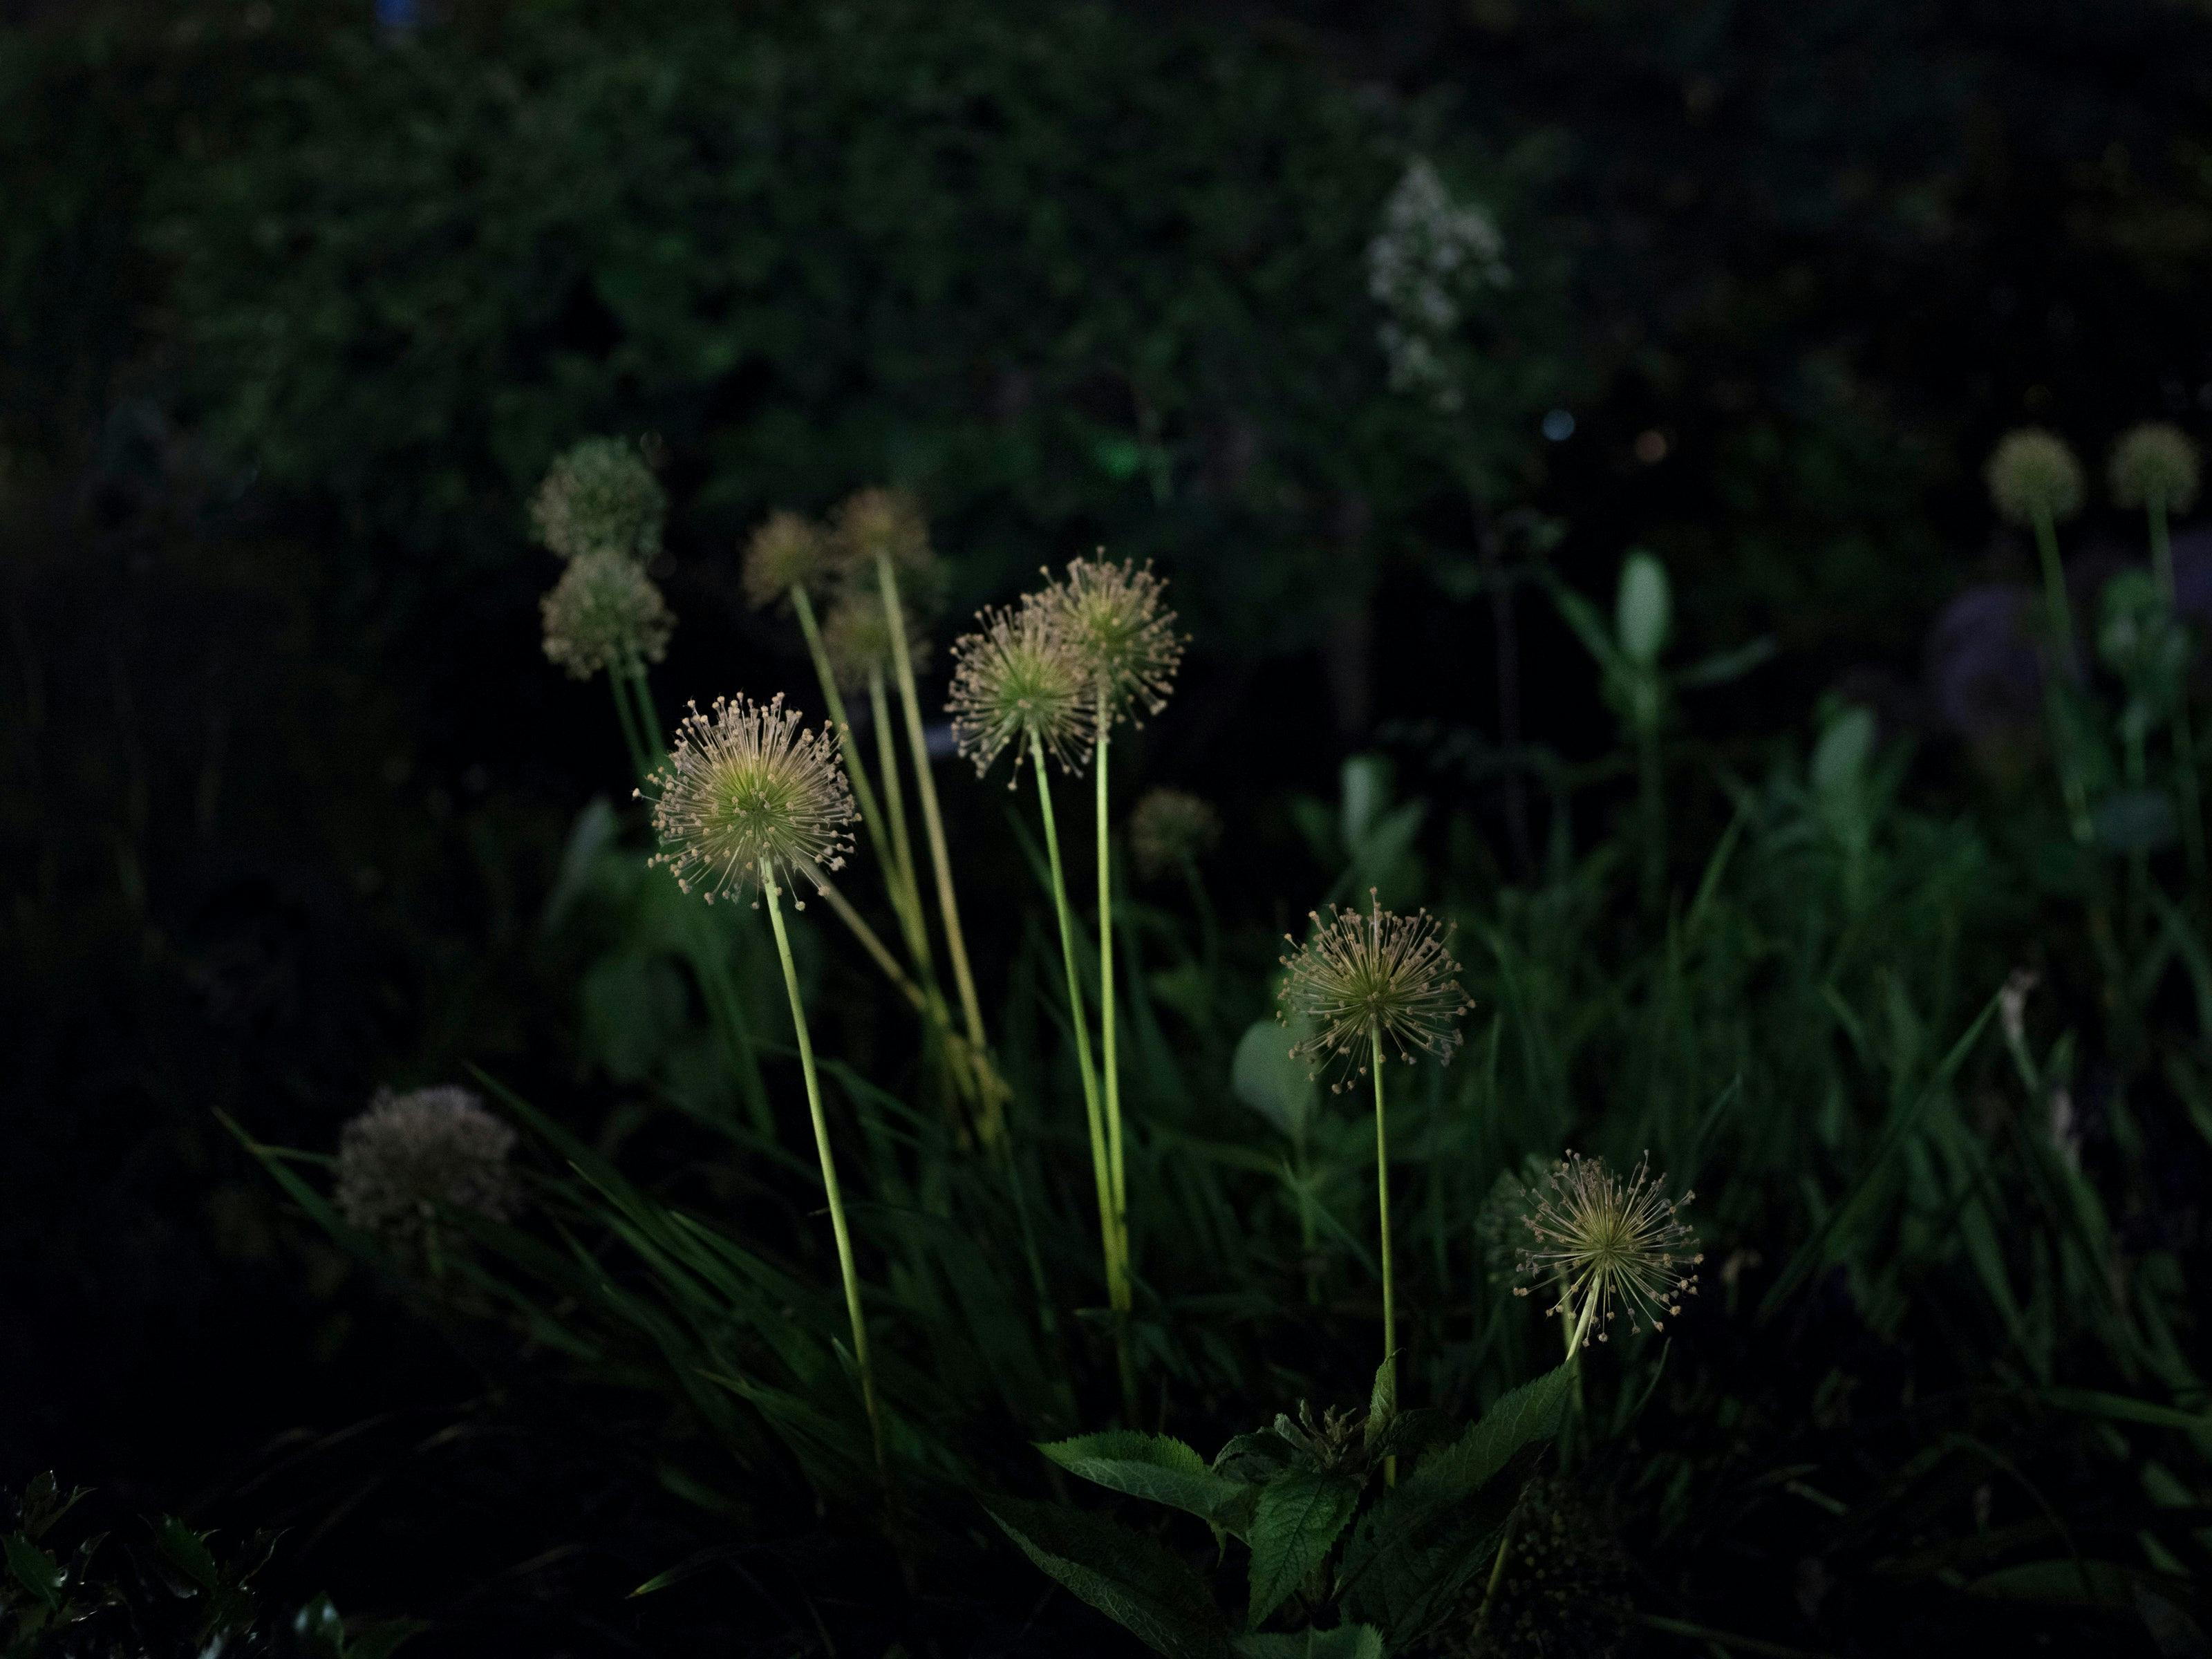 Photography by Anna Beeke titled "Midnight in the Garden #190".